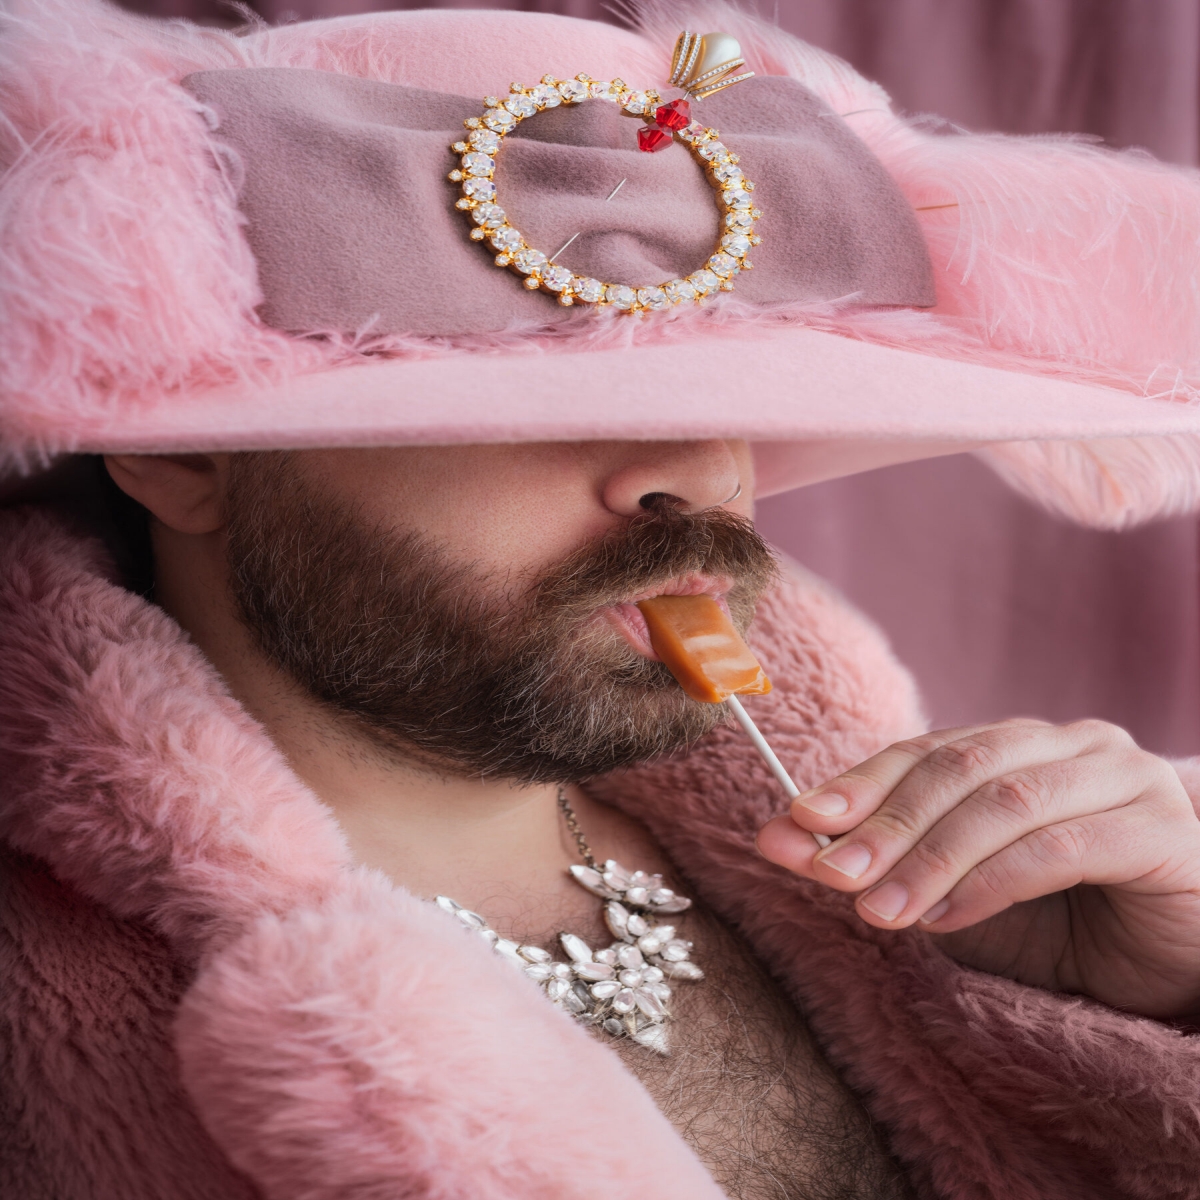 Sugar Daddy Exhibition Photo, featuring a masculine-presenting individual in a pink hat with a jeweled brooch, draped in furs, eating a lollipop